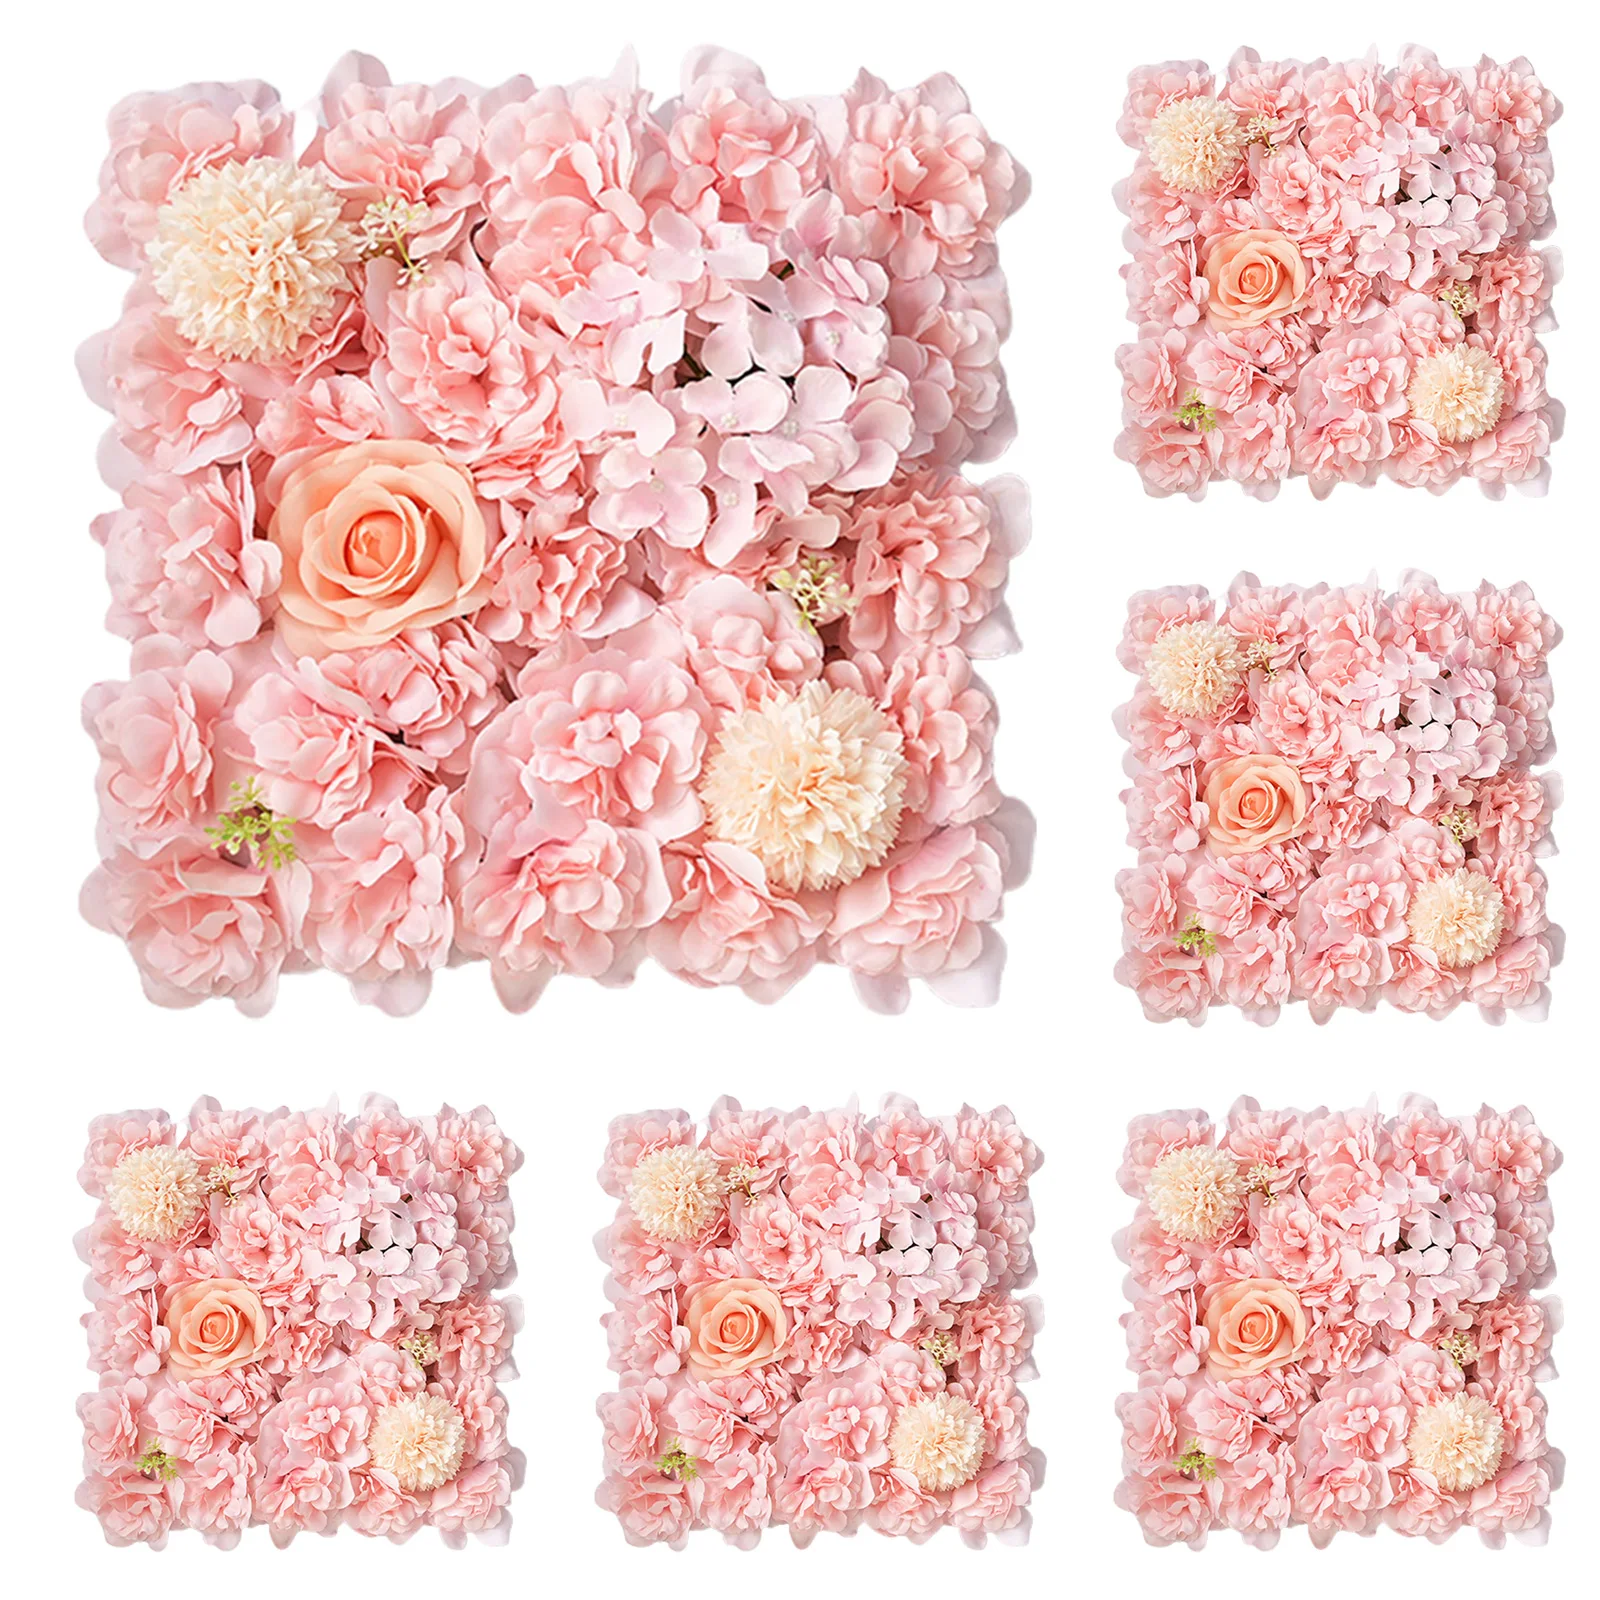 

Artificial Silk Flowers Wall Panels 3D Rose Flower Art Wall Backdrop DIY Wedding Party Bridal Shower Background Home Decoration